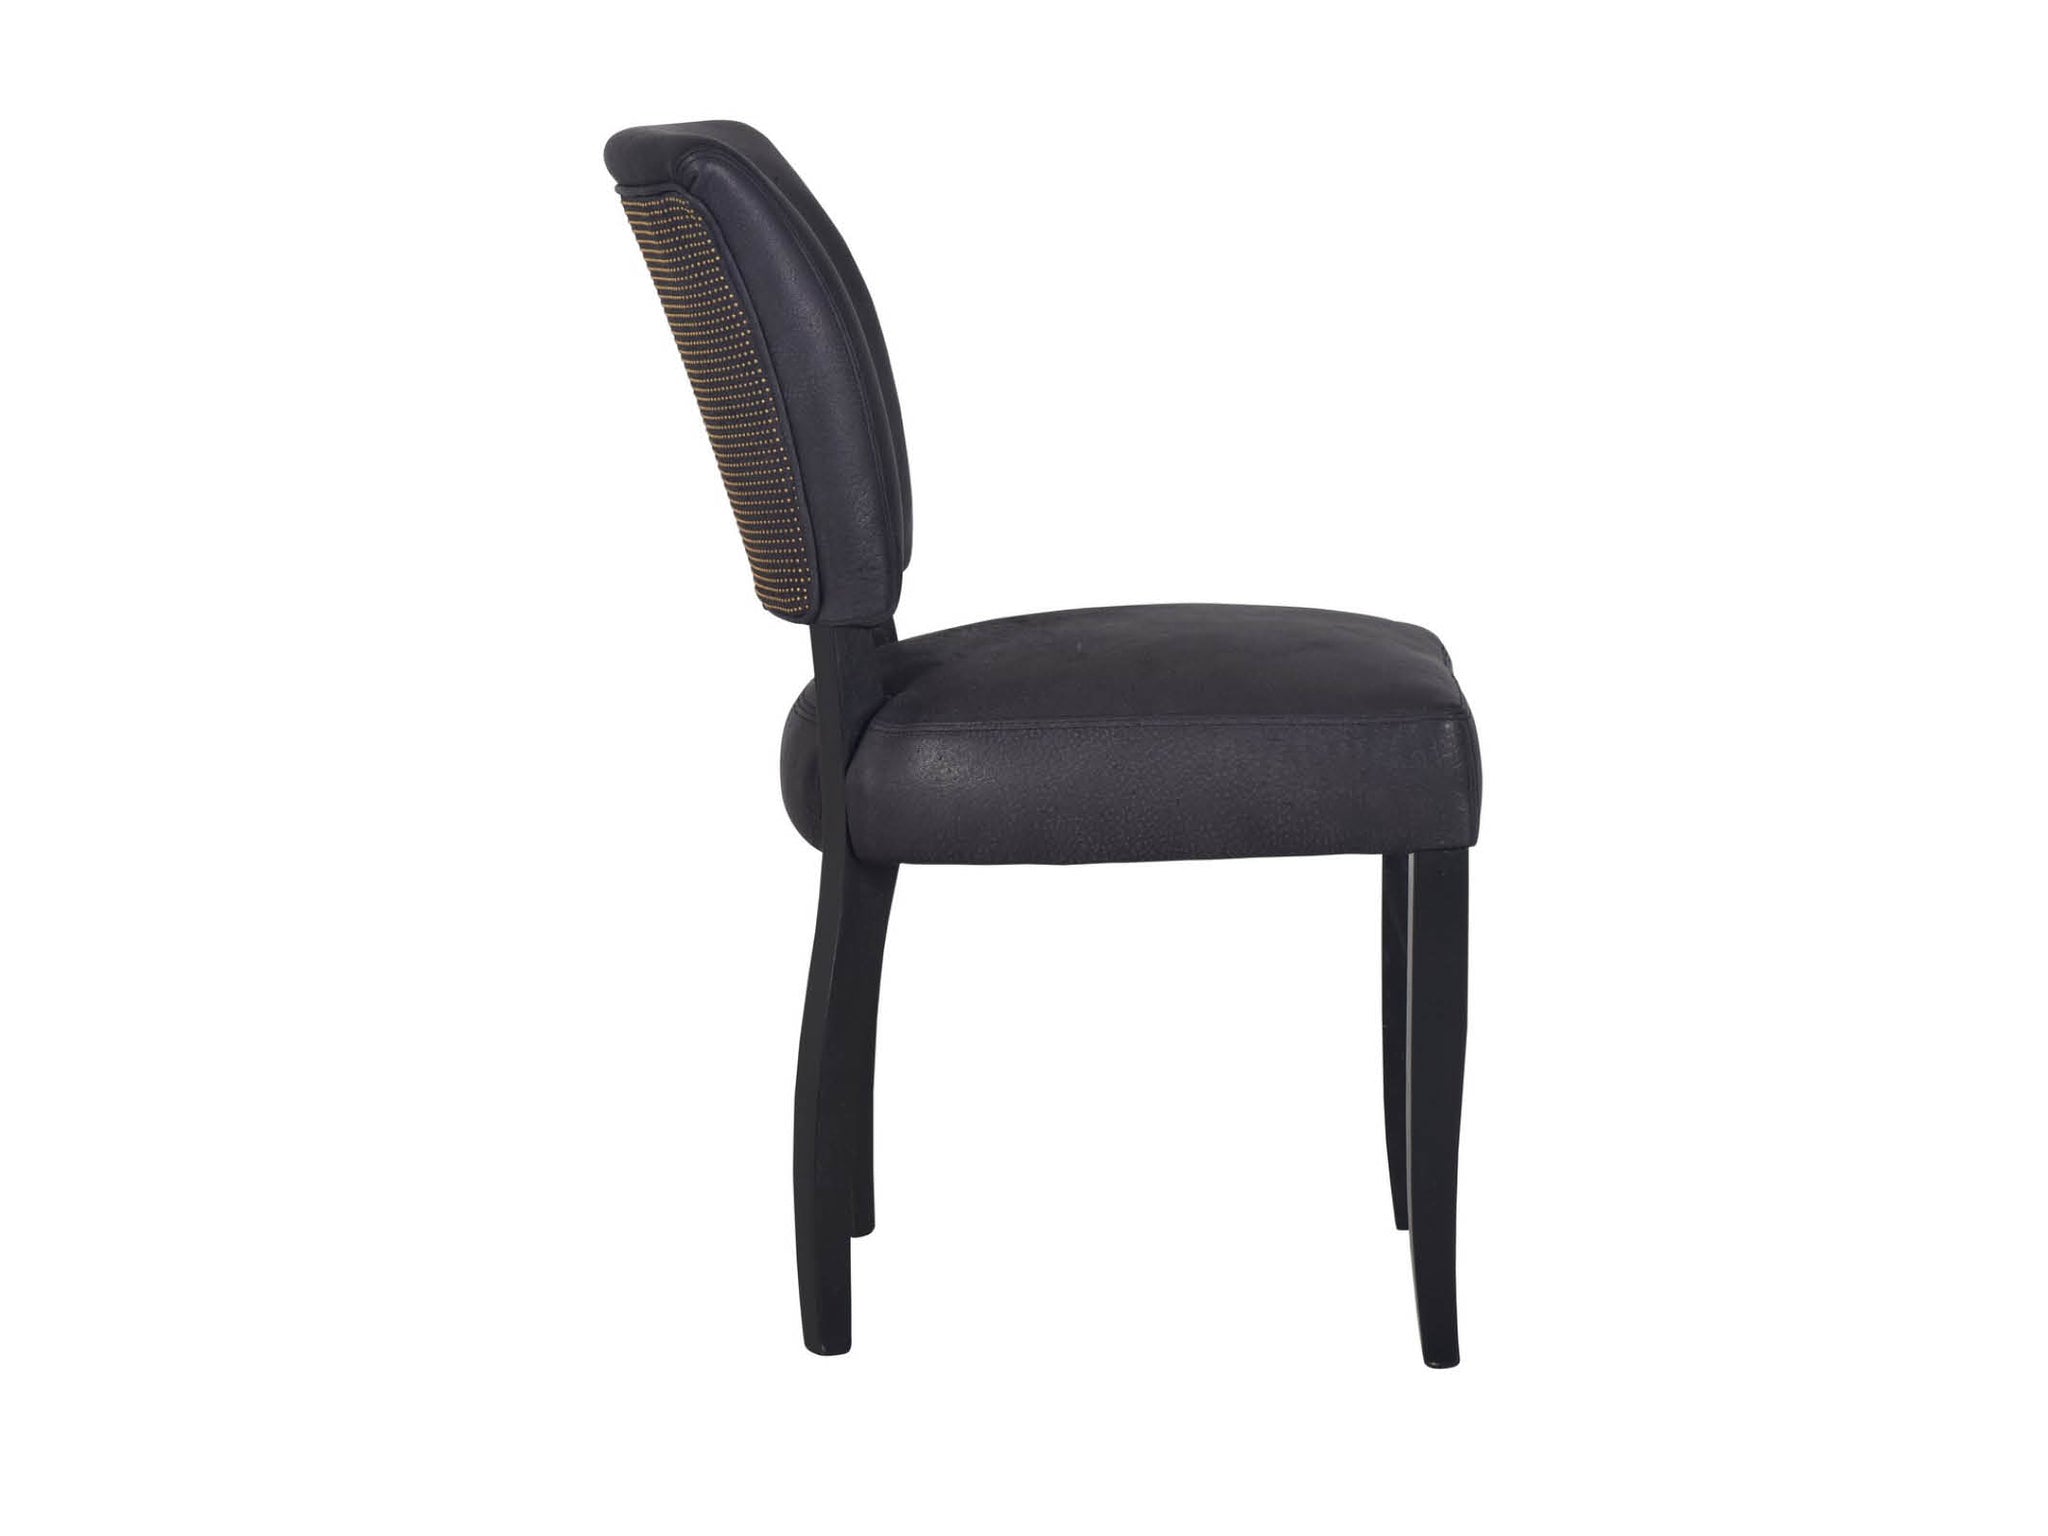 Mimi stud dining chair - Clearance item